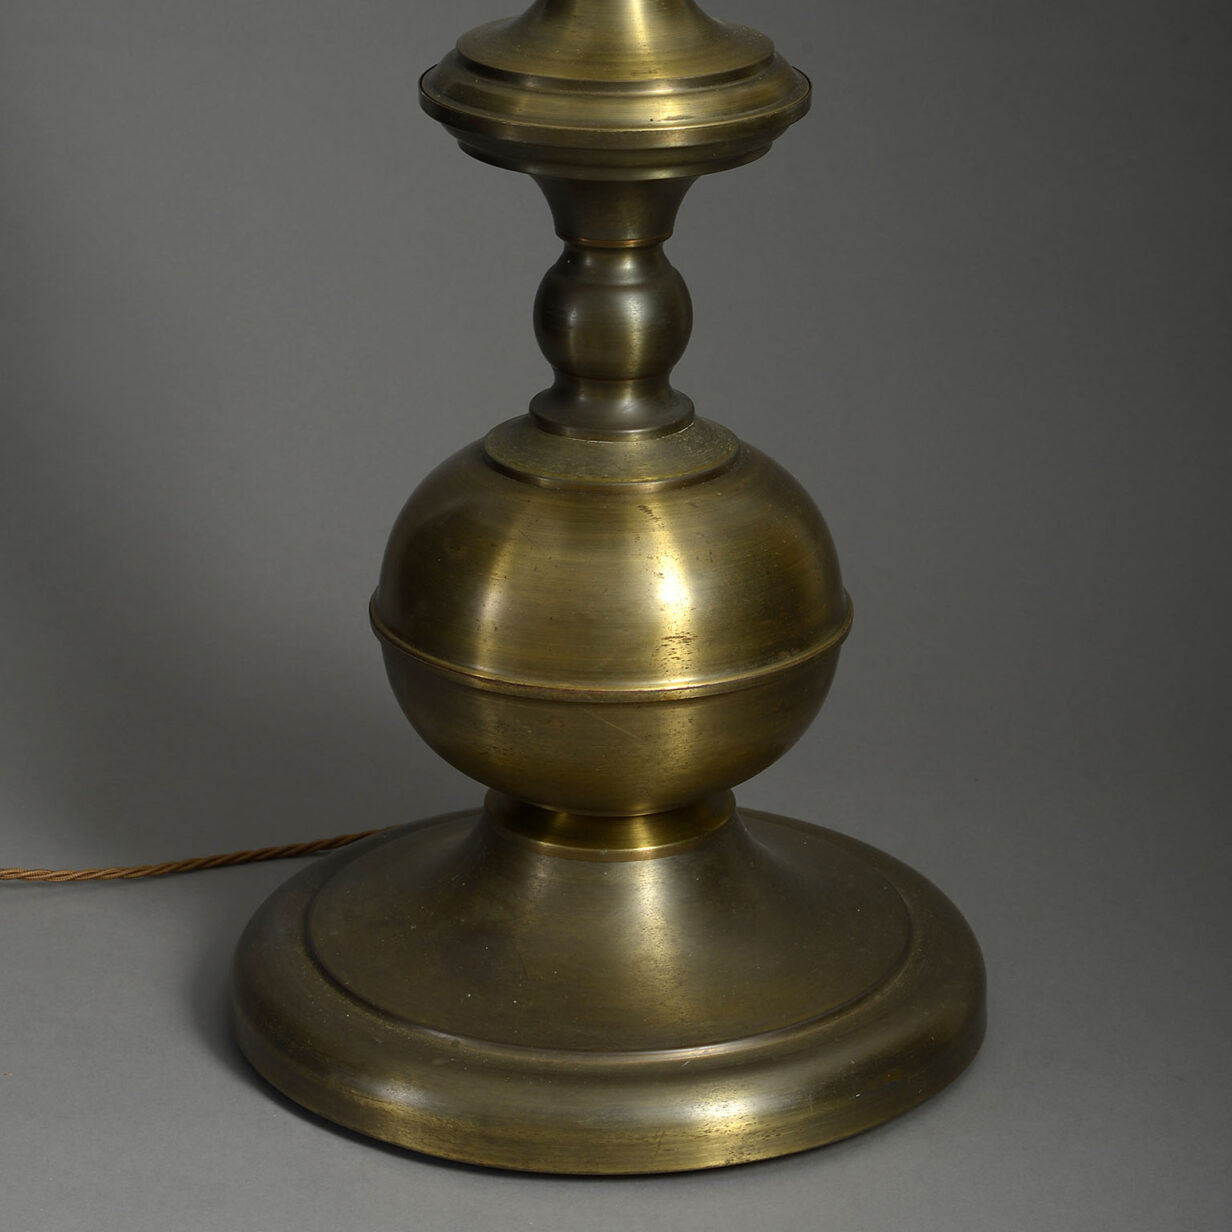 Turned brass table lamp